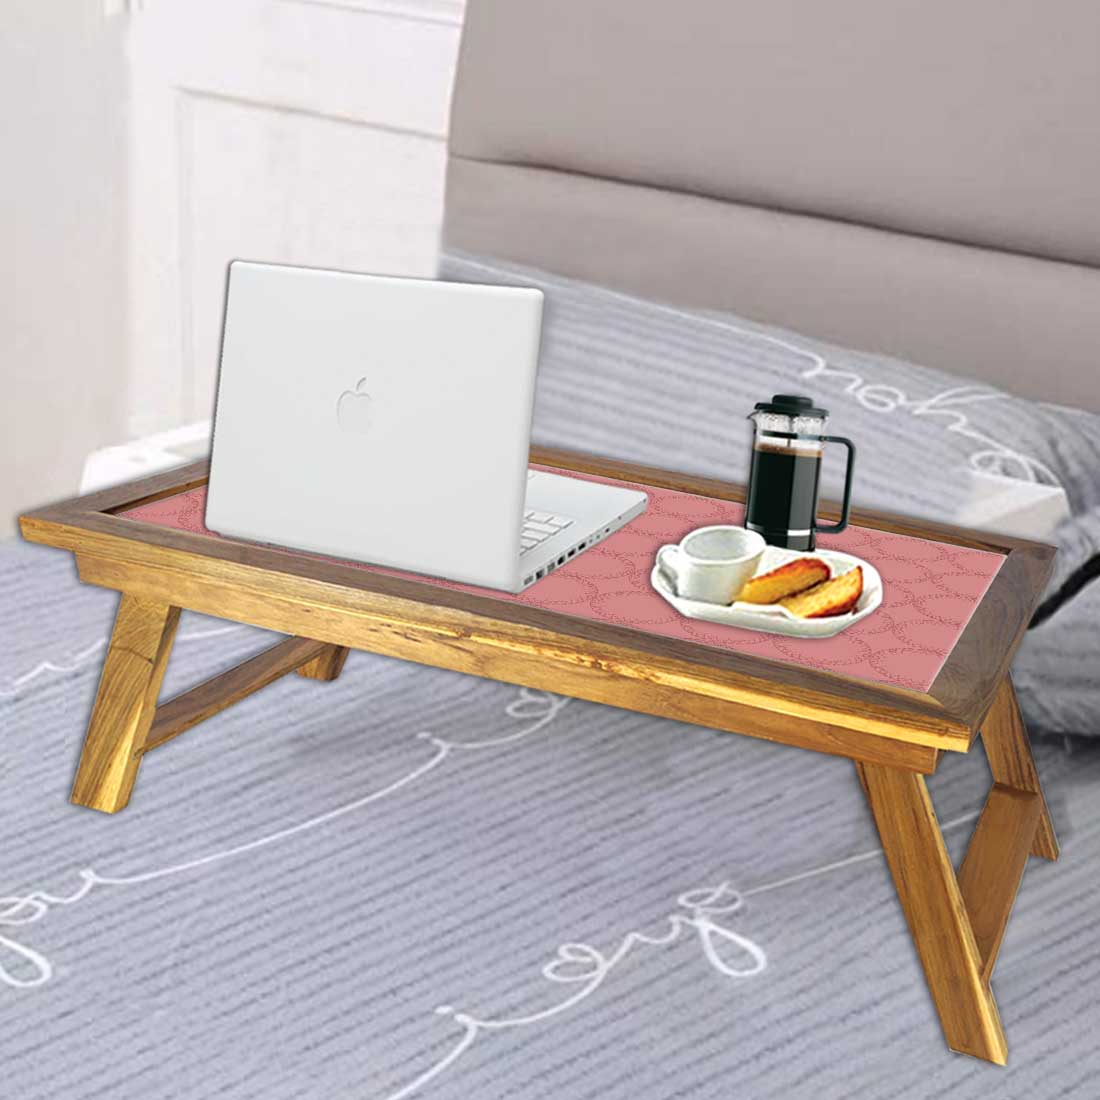 Nutcase Folding Laptop Table For Home Bed Lapdesk Breakfast Table Foldable Teak Wooden Study Desk - Peach Pattern Circle Nutcase